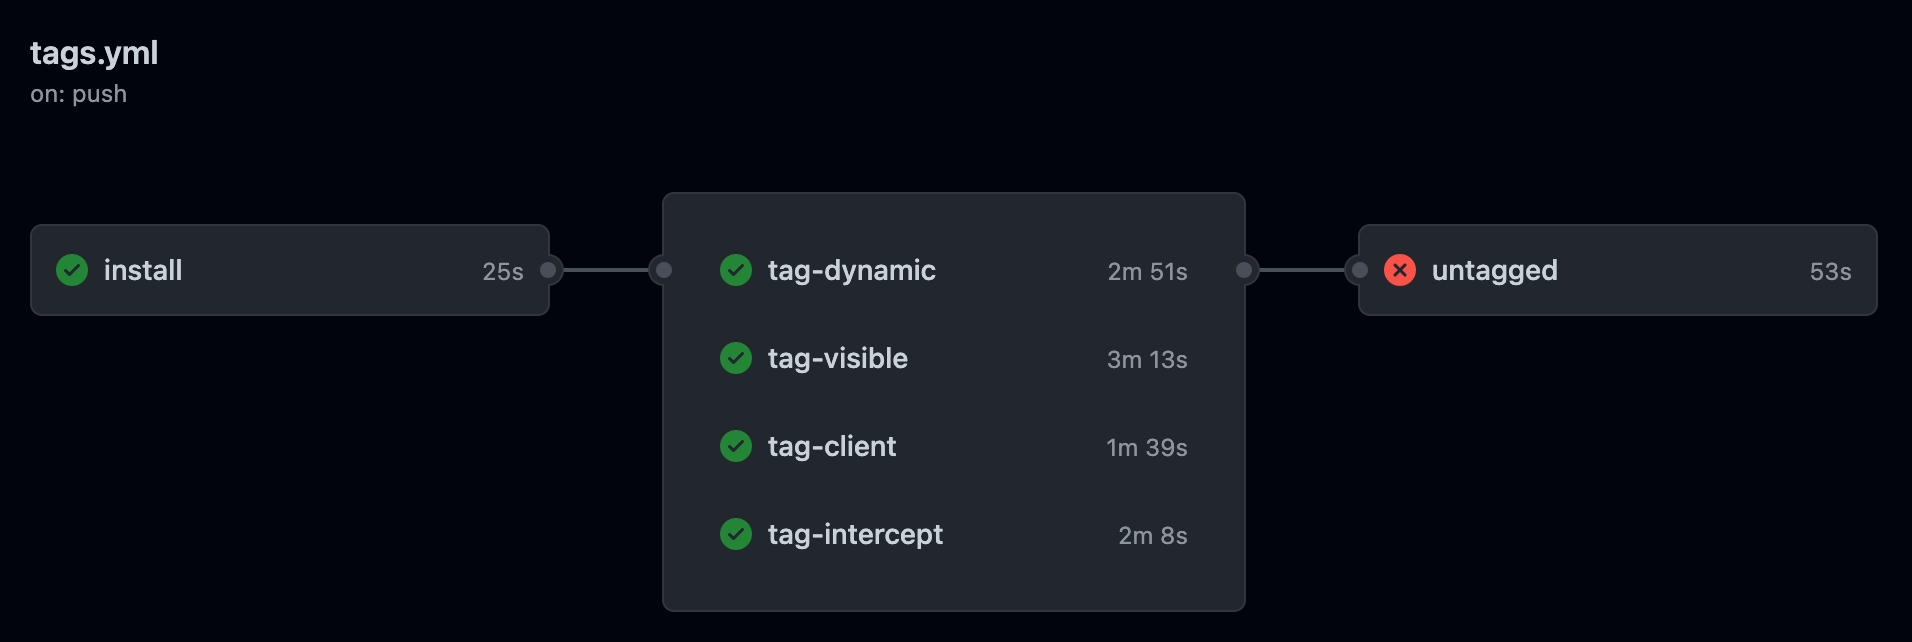 Tags workflow